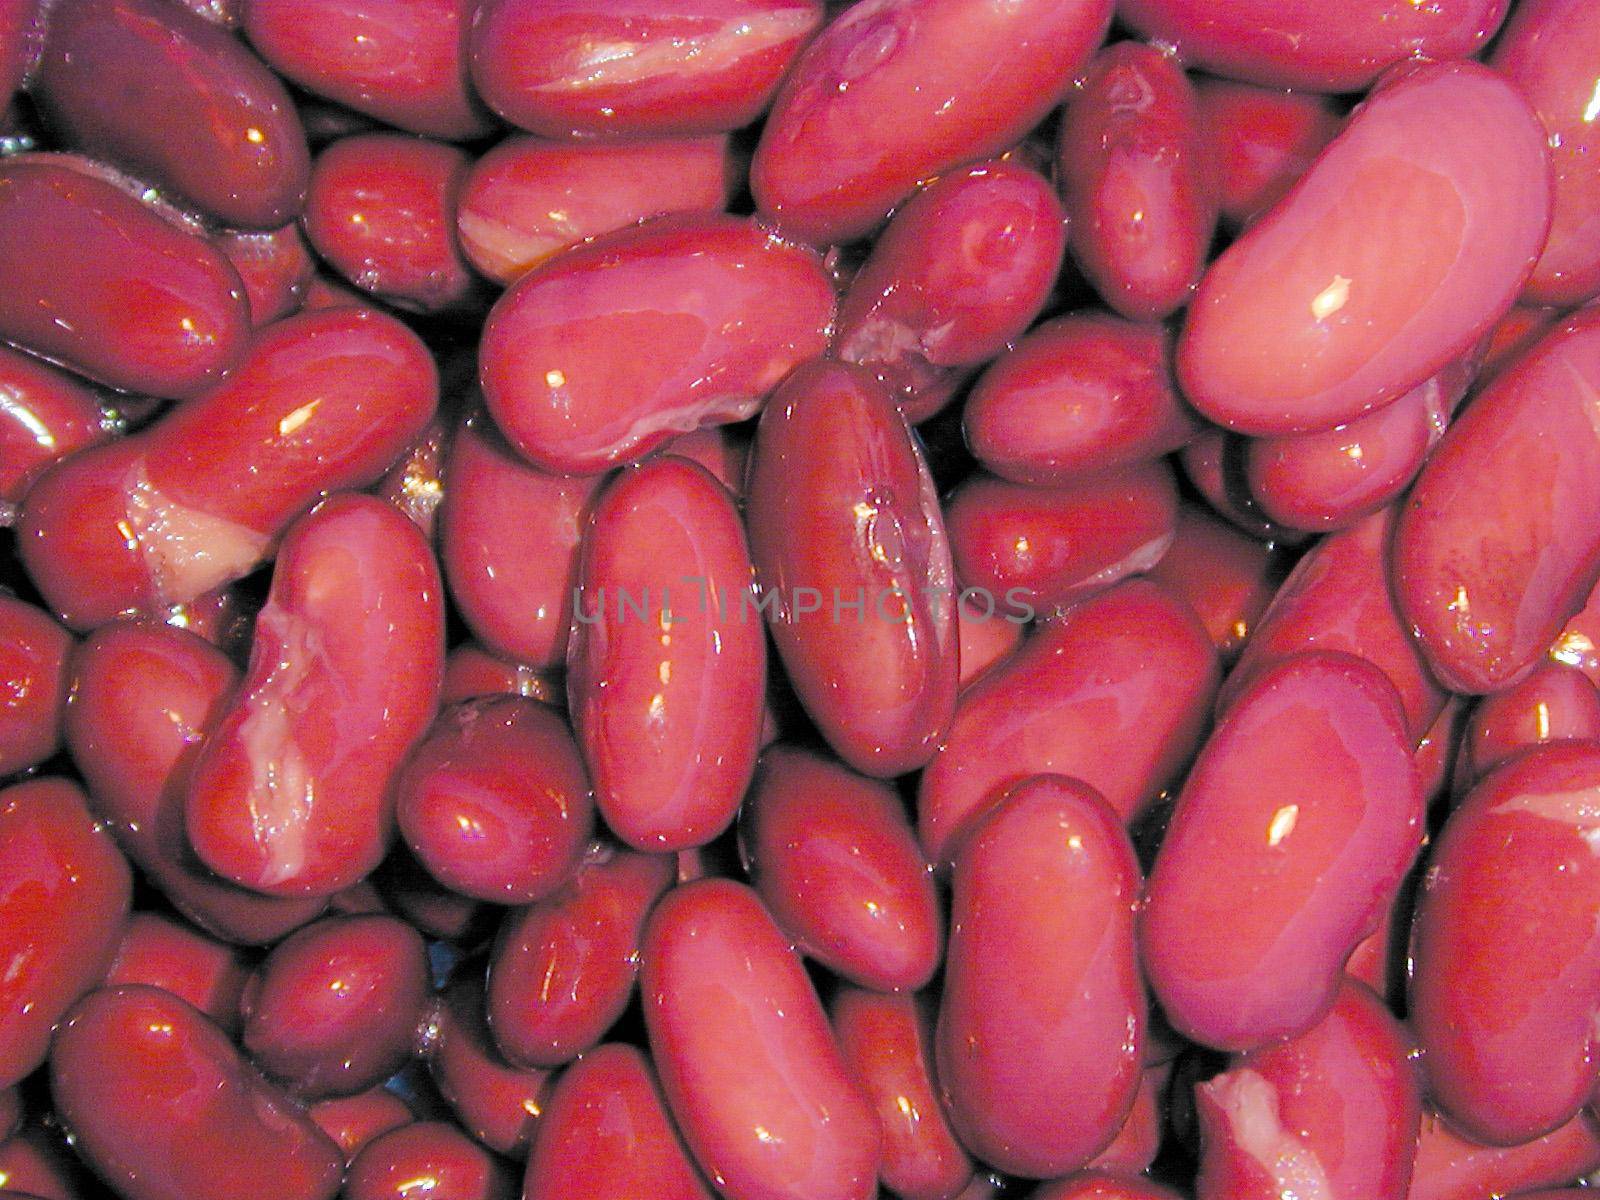 Background texture of red kidney beans, a healthy legume high in starch, protein and dietary fiber